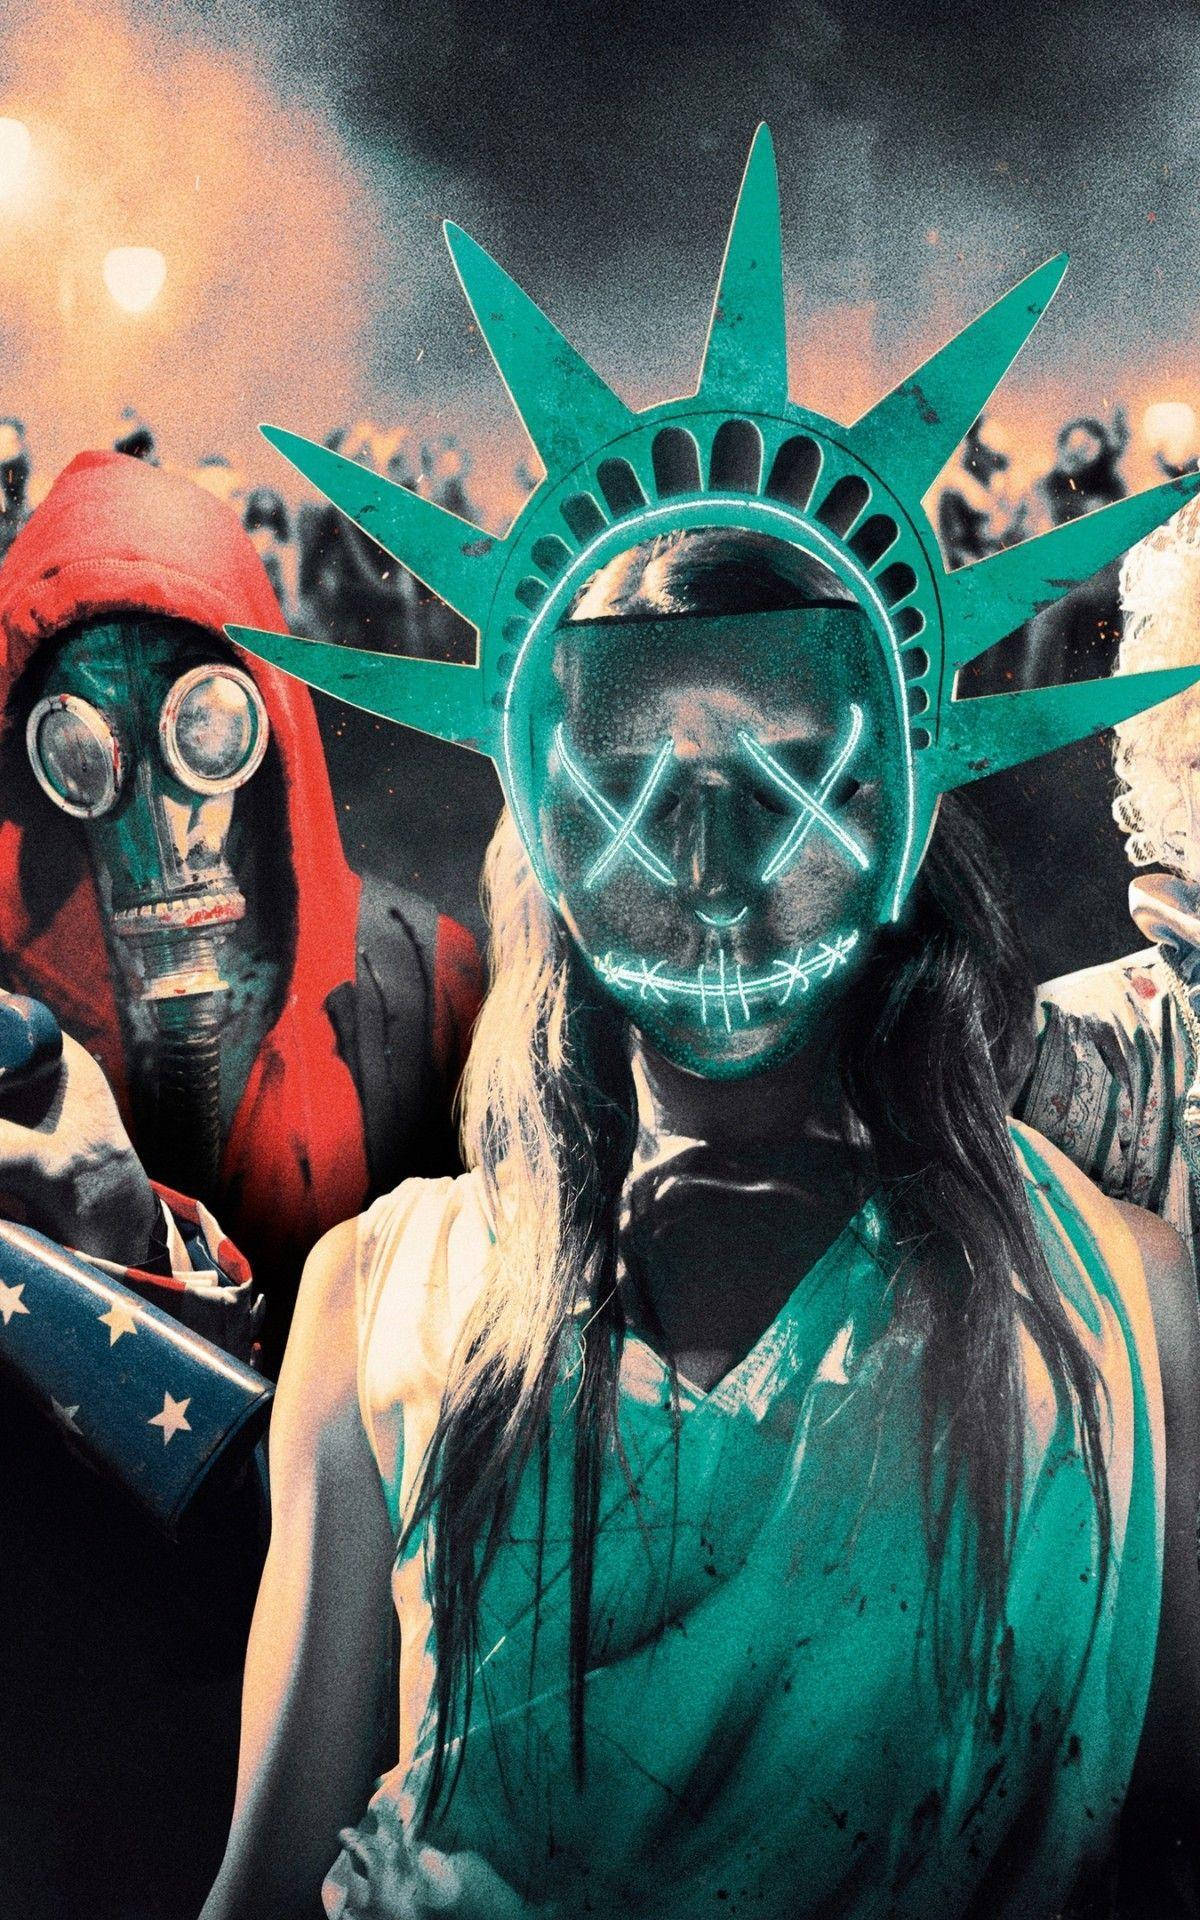 The embodiment of Fear - Lady Liberty in The Purge Wallpaper